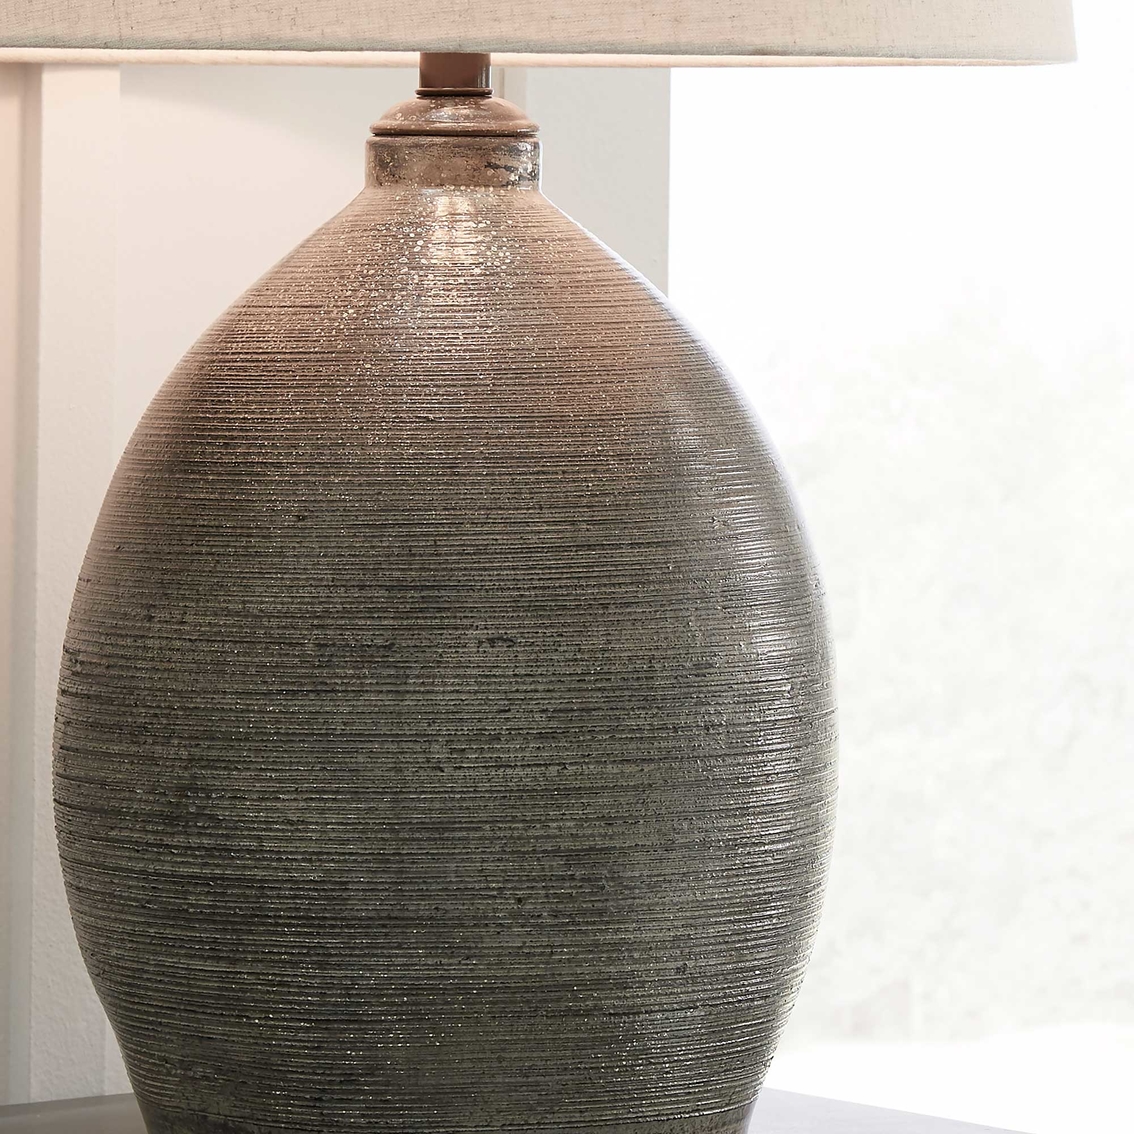 Signature Design by Ashley Joyelle Terracotta 27.5 in. Table Lamp - Image 3 of 3